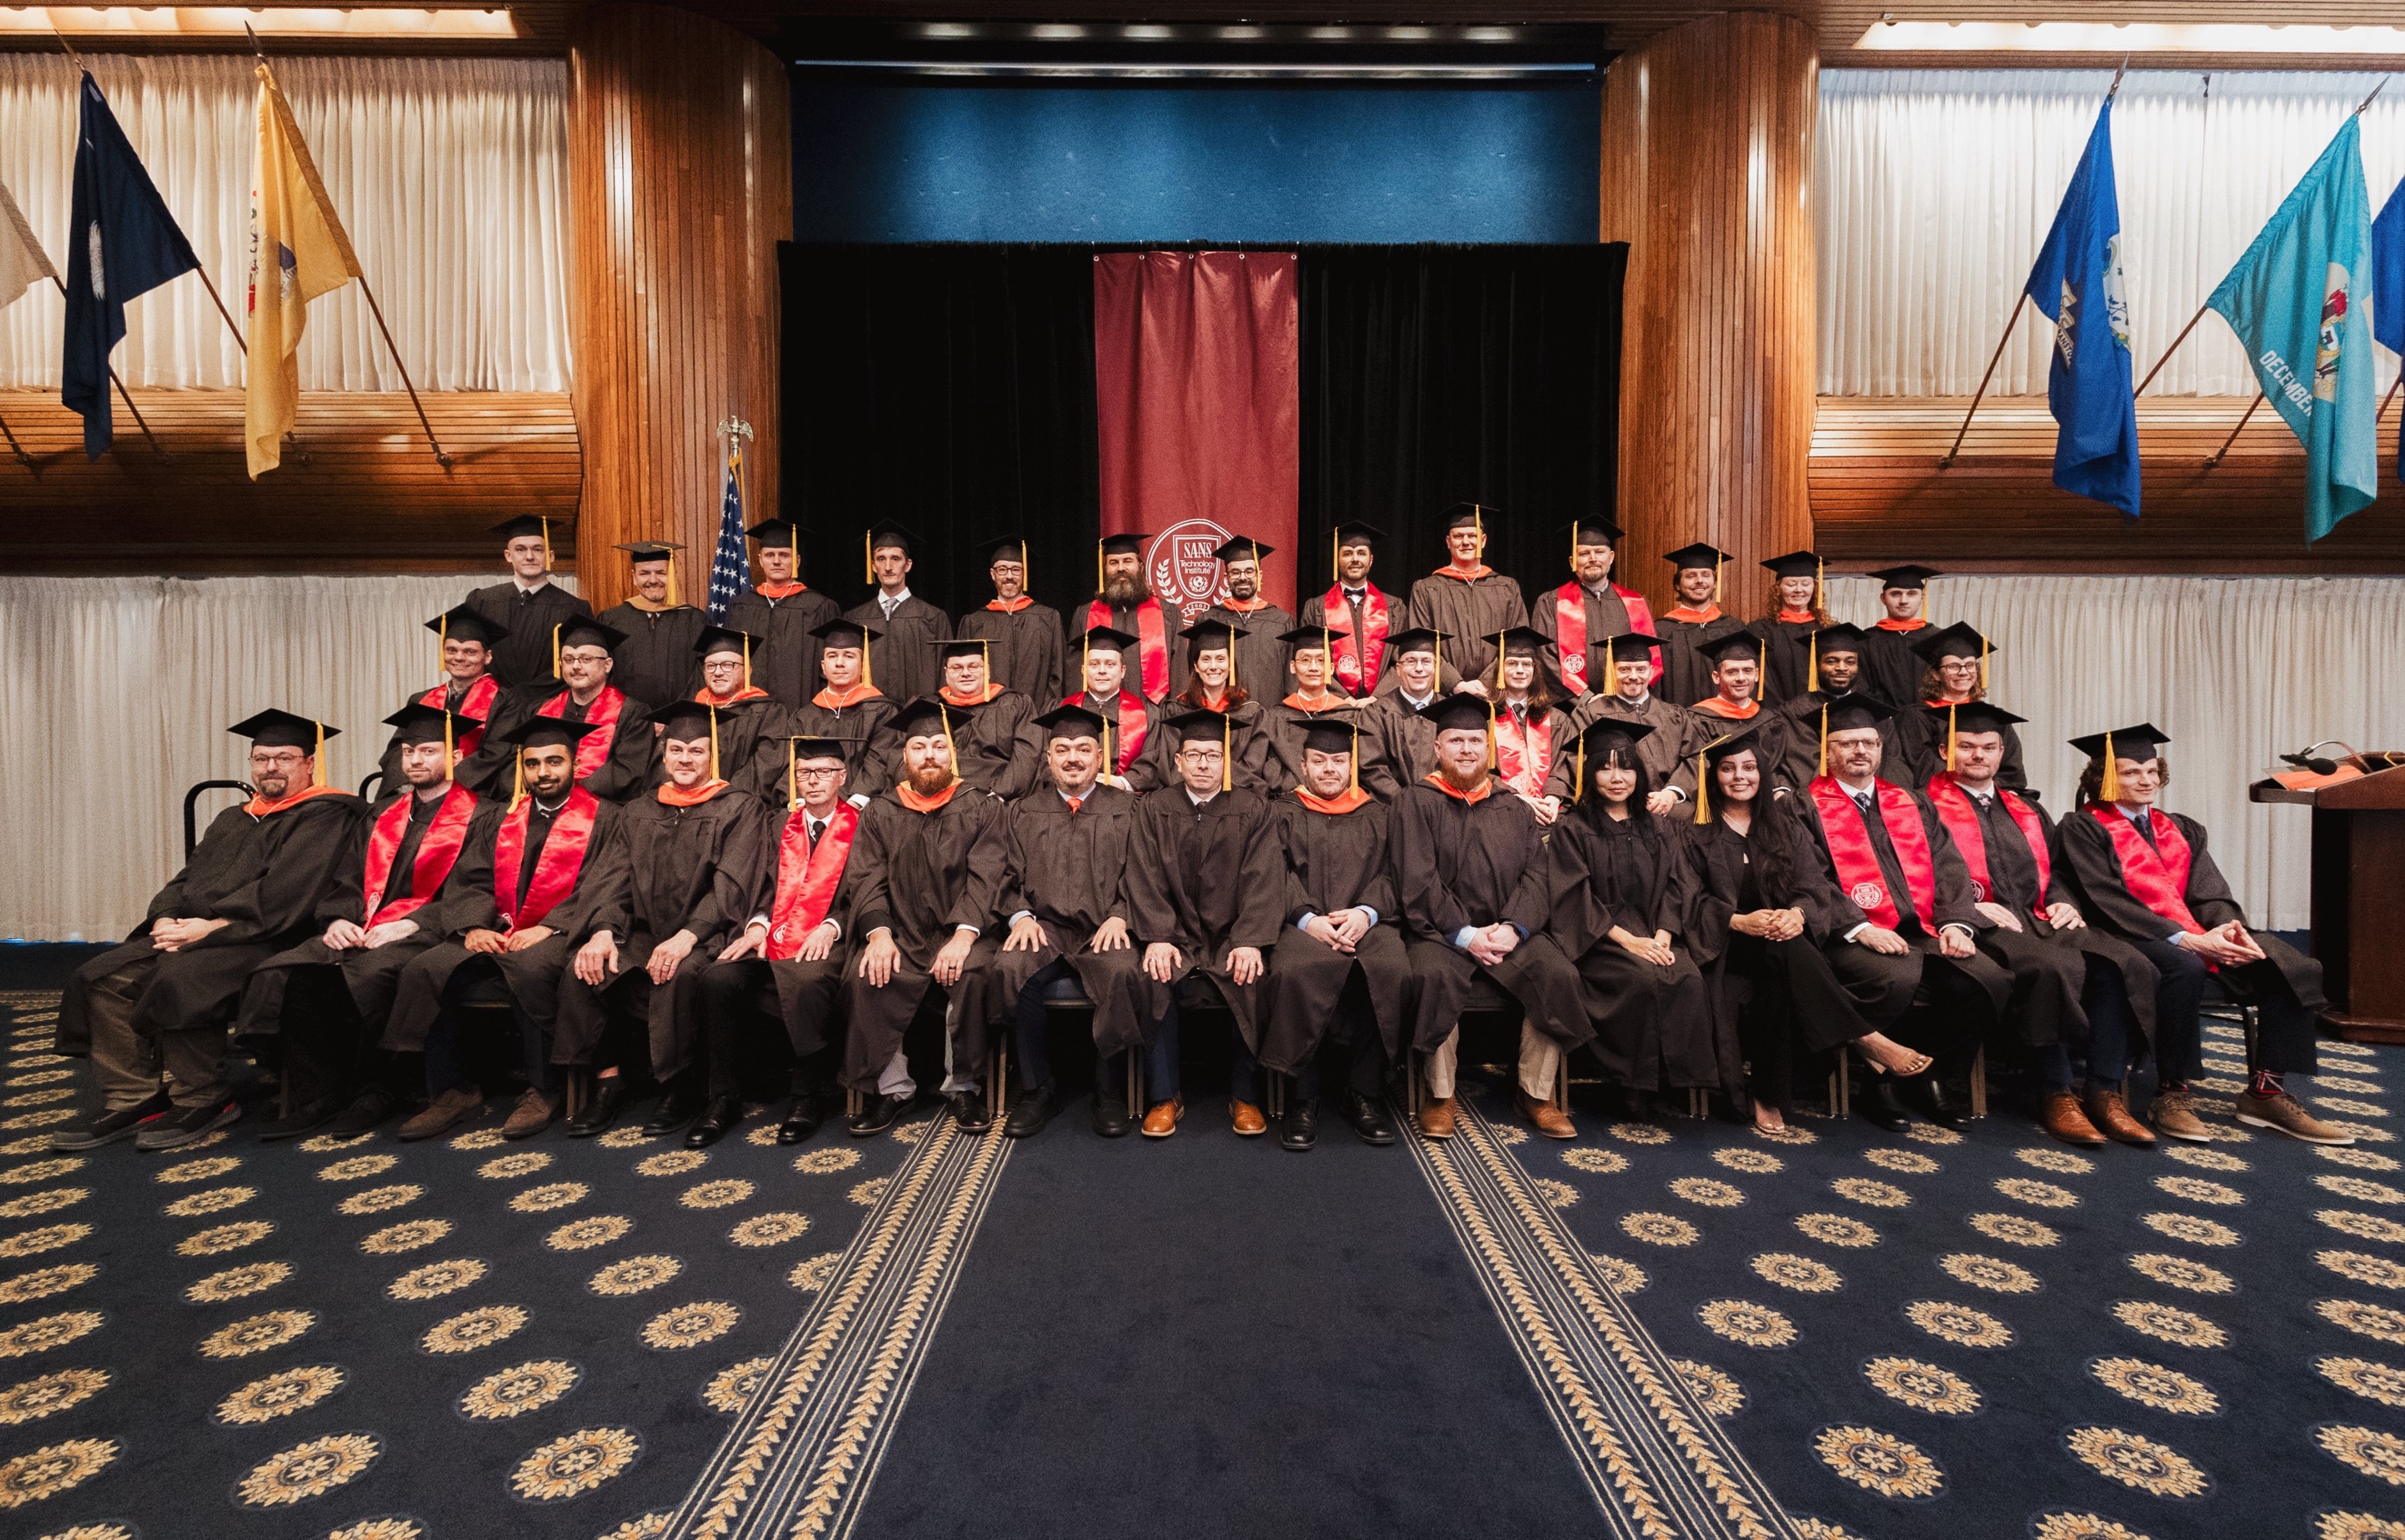 A group of graduates in brown gowns and caps

Description automatically generated